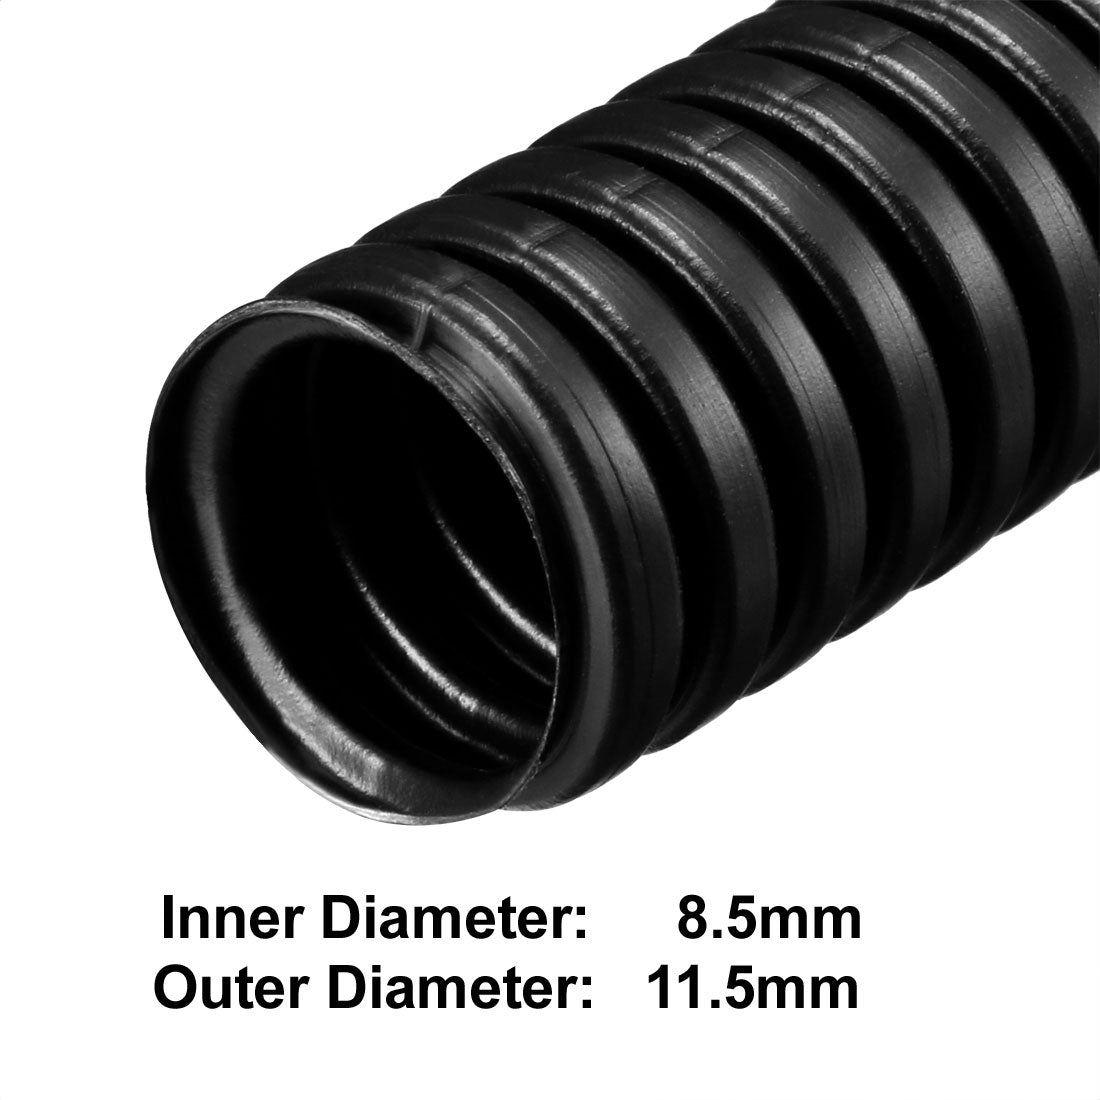 uxcell Uxcell 2.5 M 8.5 x 11.5 mm PP Flexible Corrugated Conduit Tube for Garden,Office Black